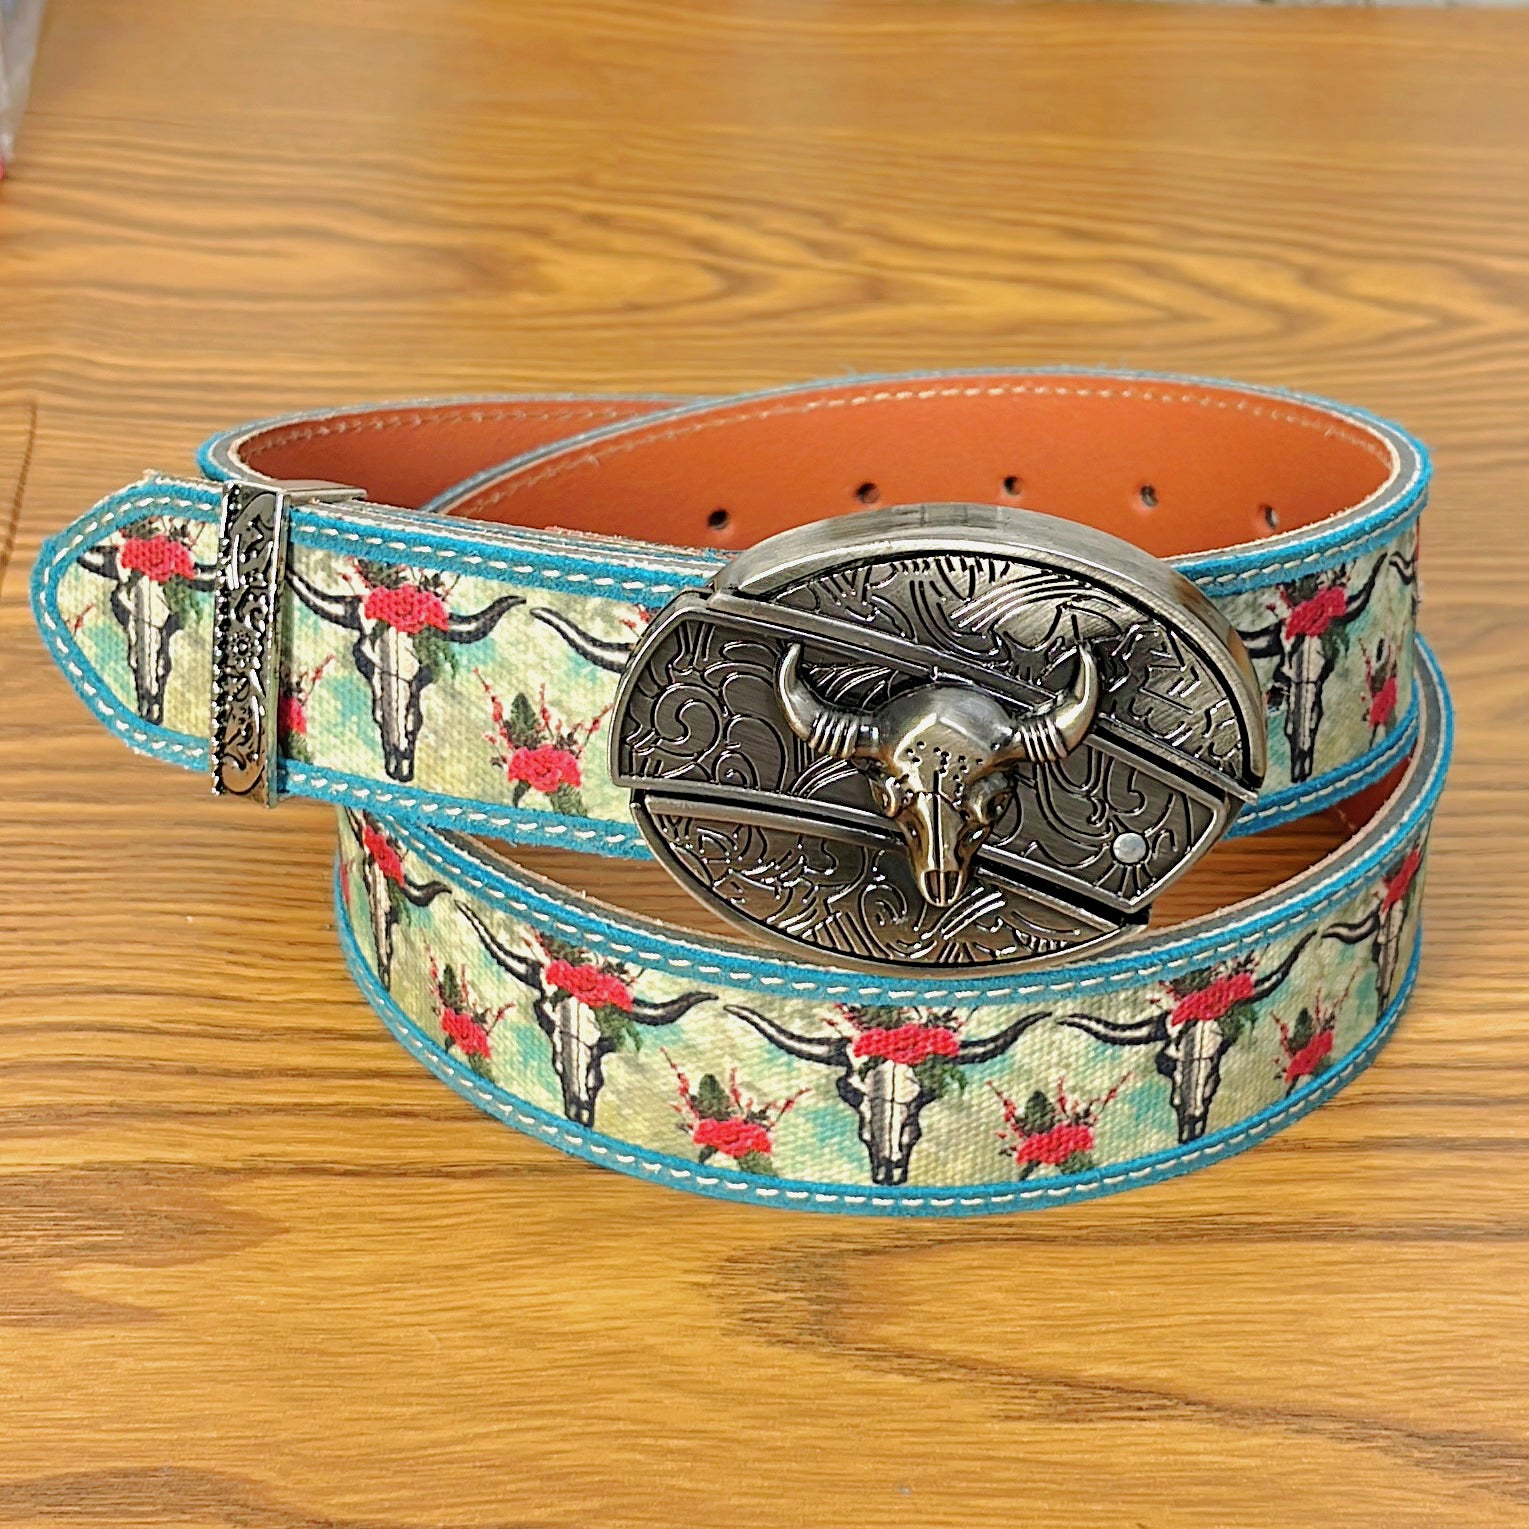 Cow Carved Fabric Painted Cow Leather Vintage Belt